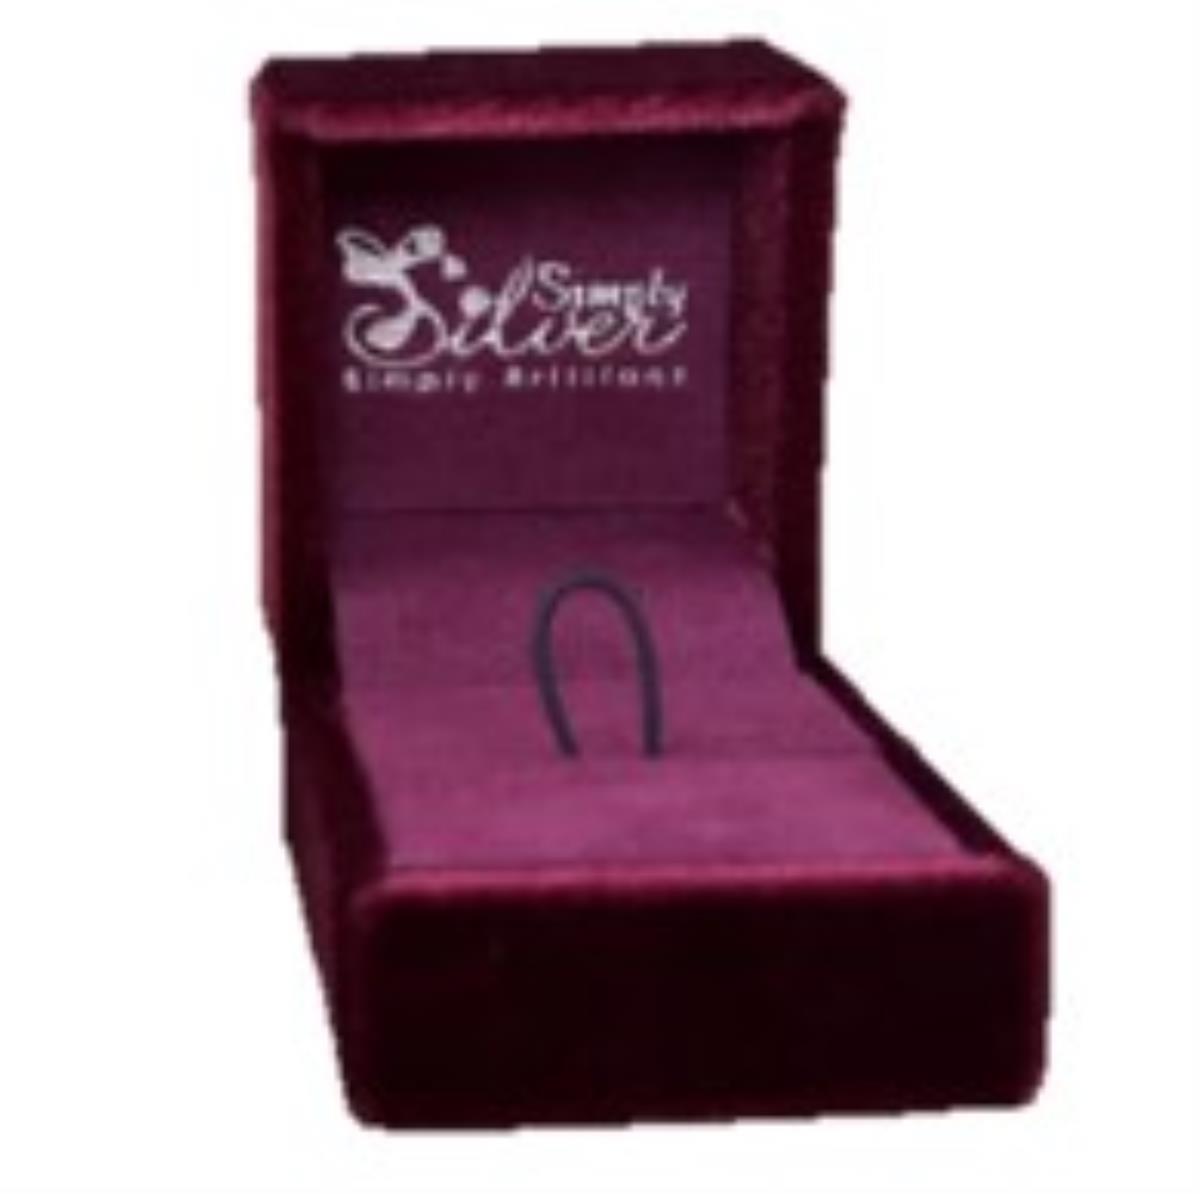 Simply Silver Simply Brilliant 14KT PLATE 48x53x36mm Burgundy Silver Foil Ring Box with Tie